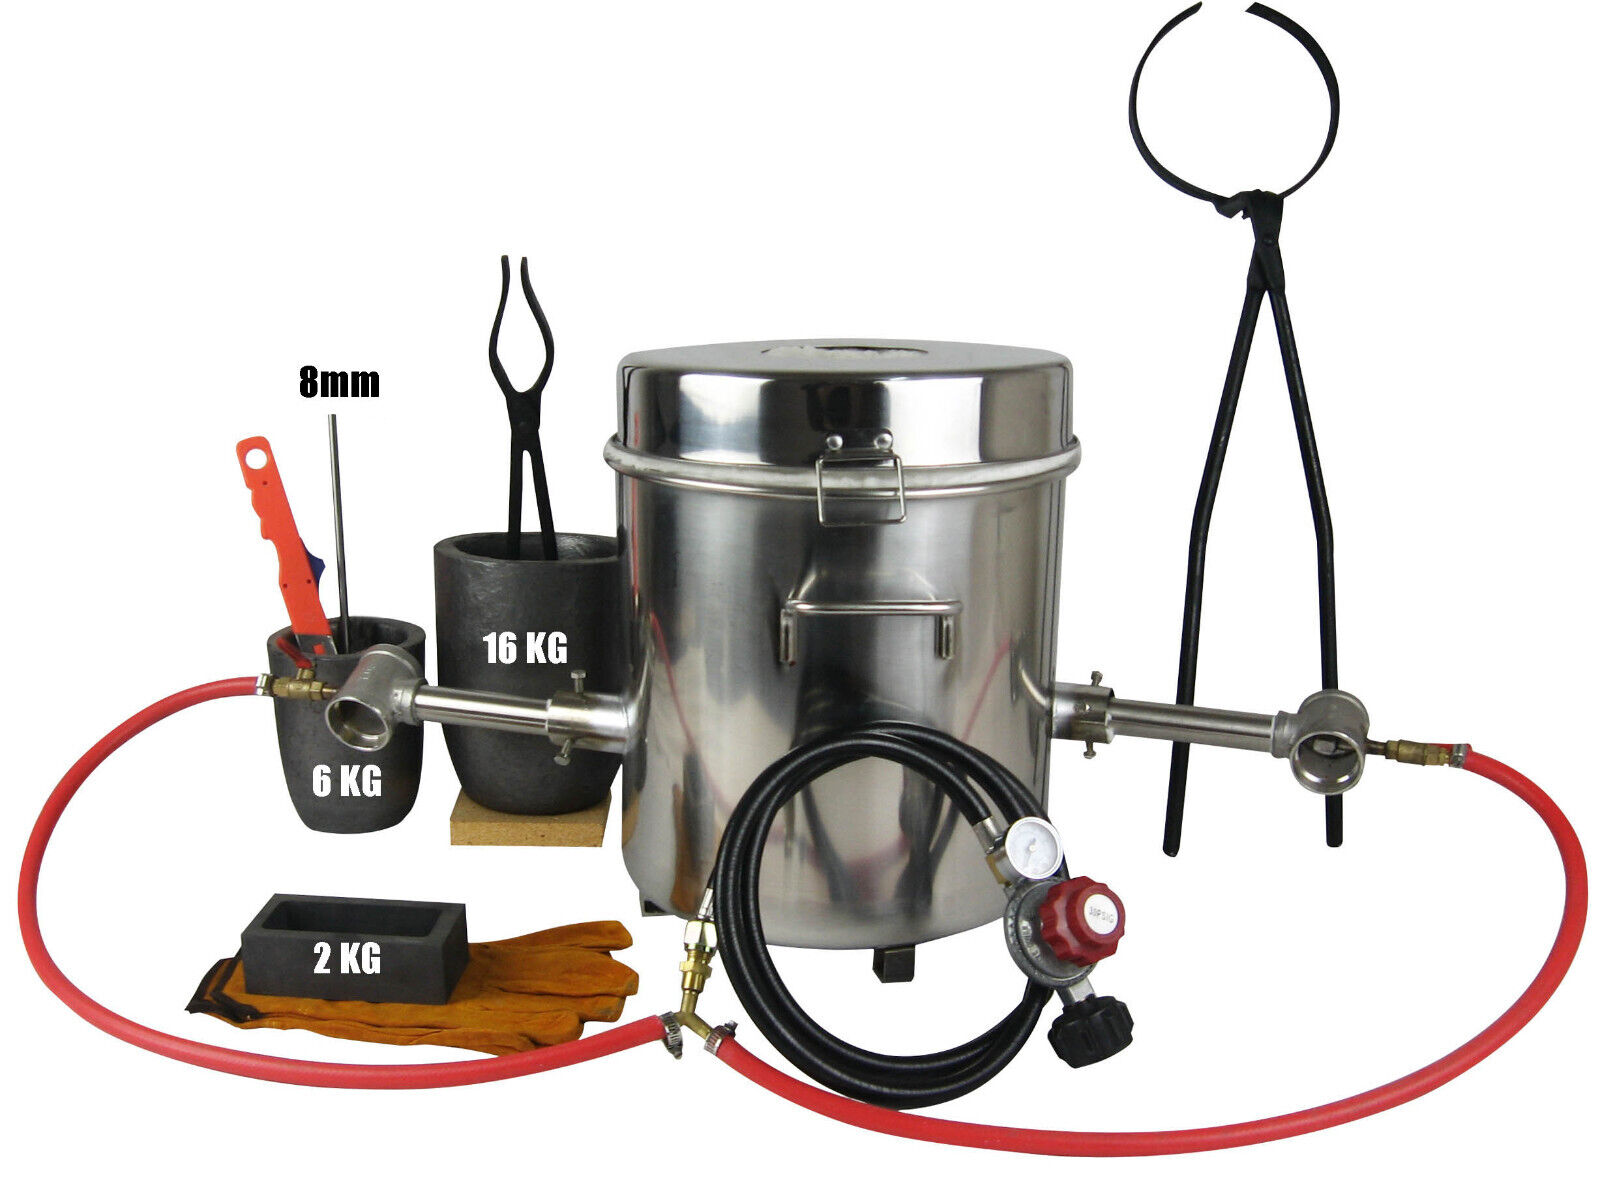 16 KG Propane Melting Furnace Kits Casting Tools with Tongs for Lifting&Pouring